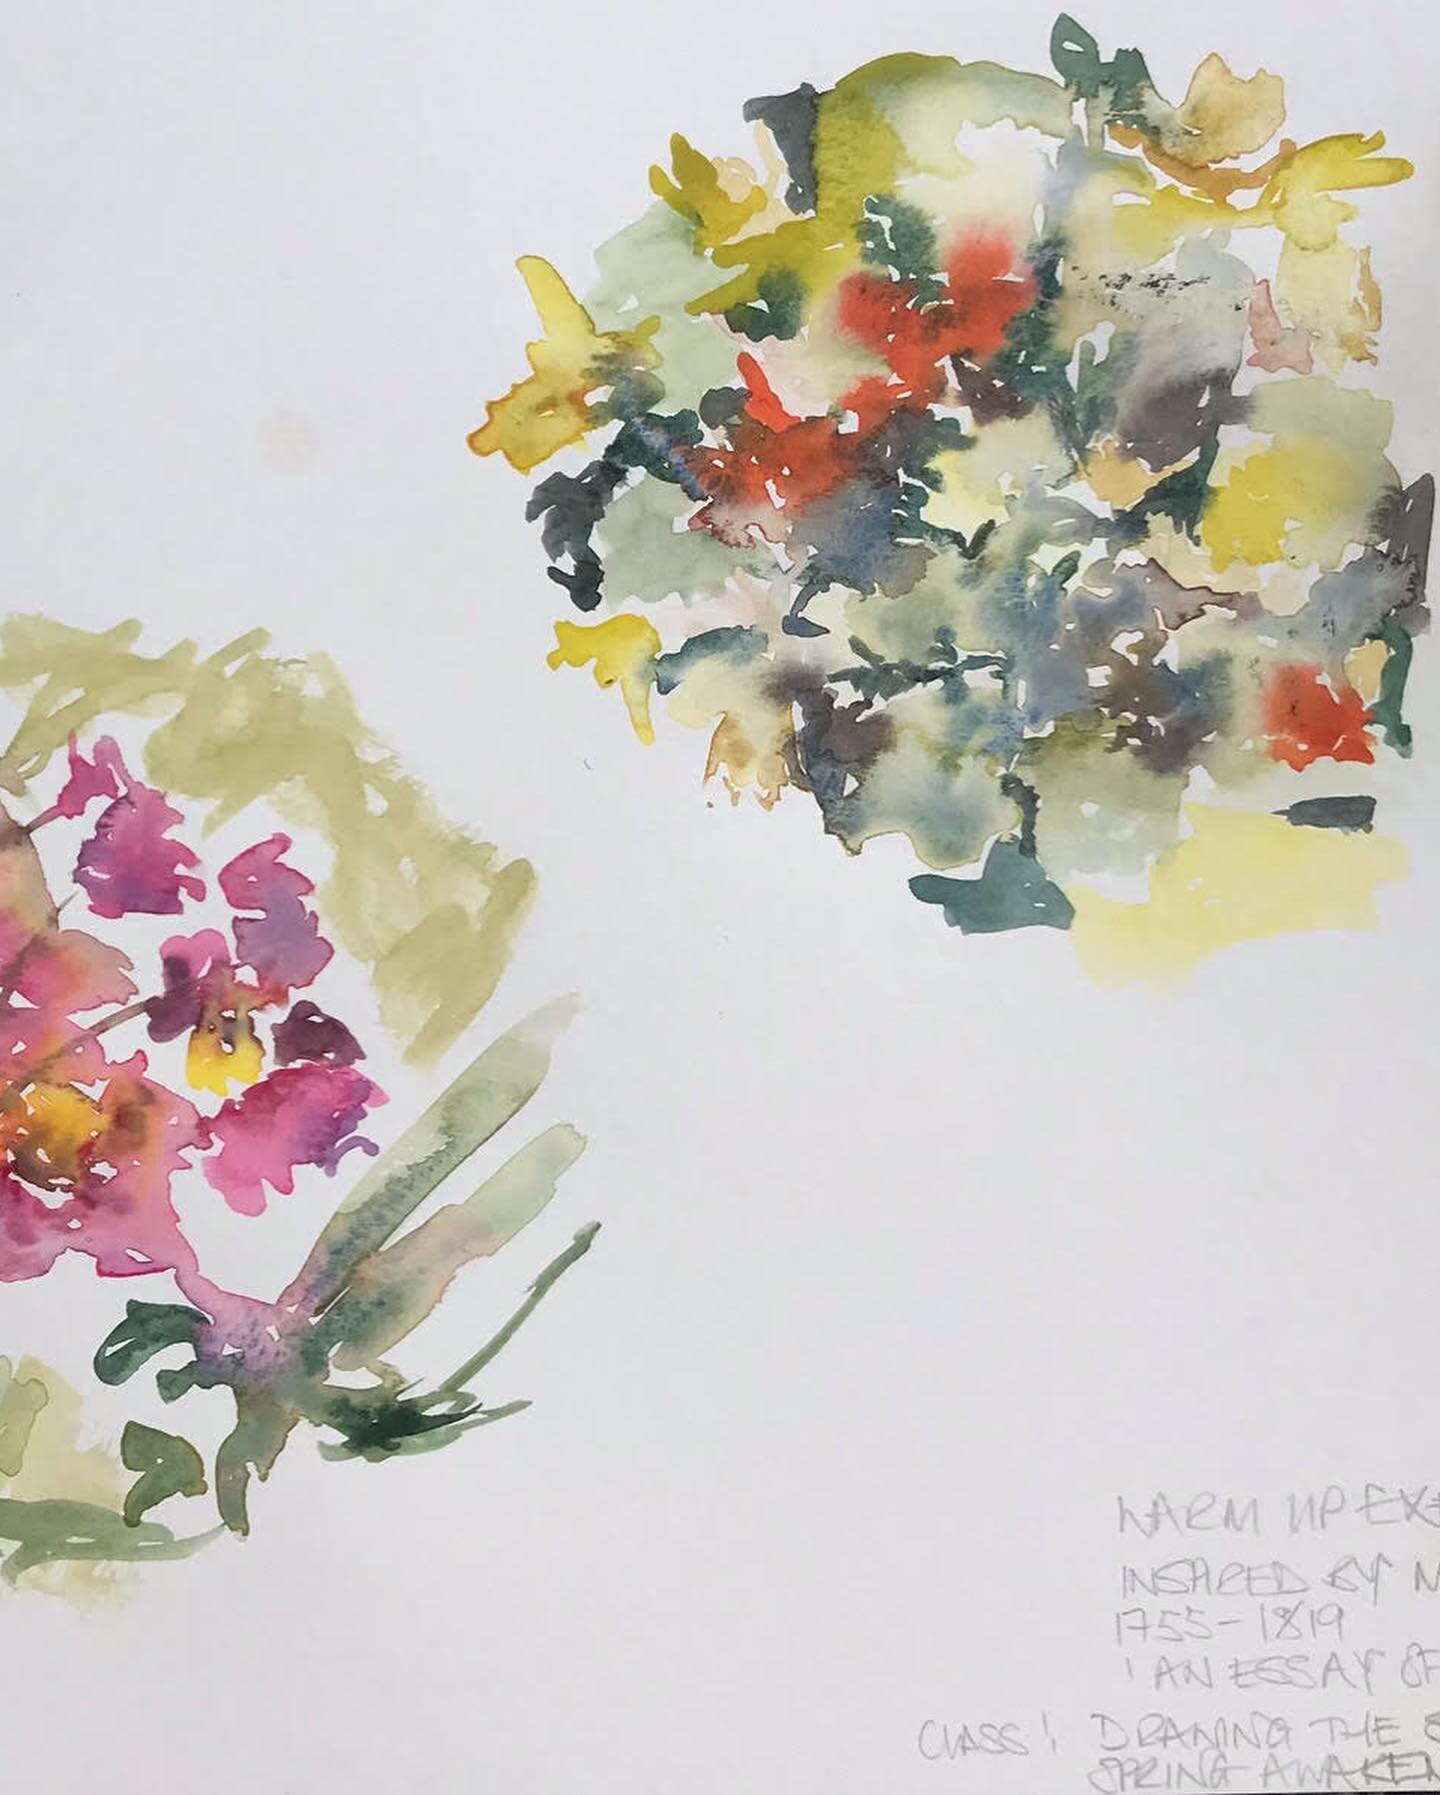 Spent a happy morning teaching Drawing the Seasons: Spring Awakening. Here is some of the artwork made by participants. We celebrated the contrasts of spring, the vigour of new growth and sharp colours. Thanks to all those who joined me, it was a ple